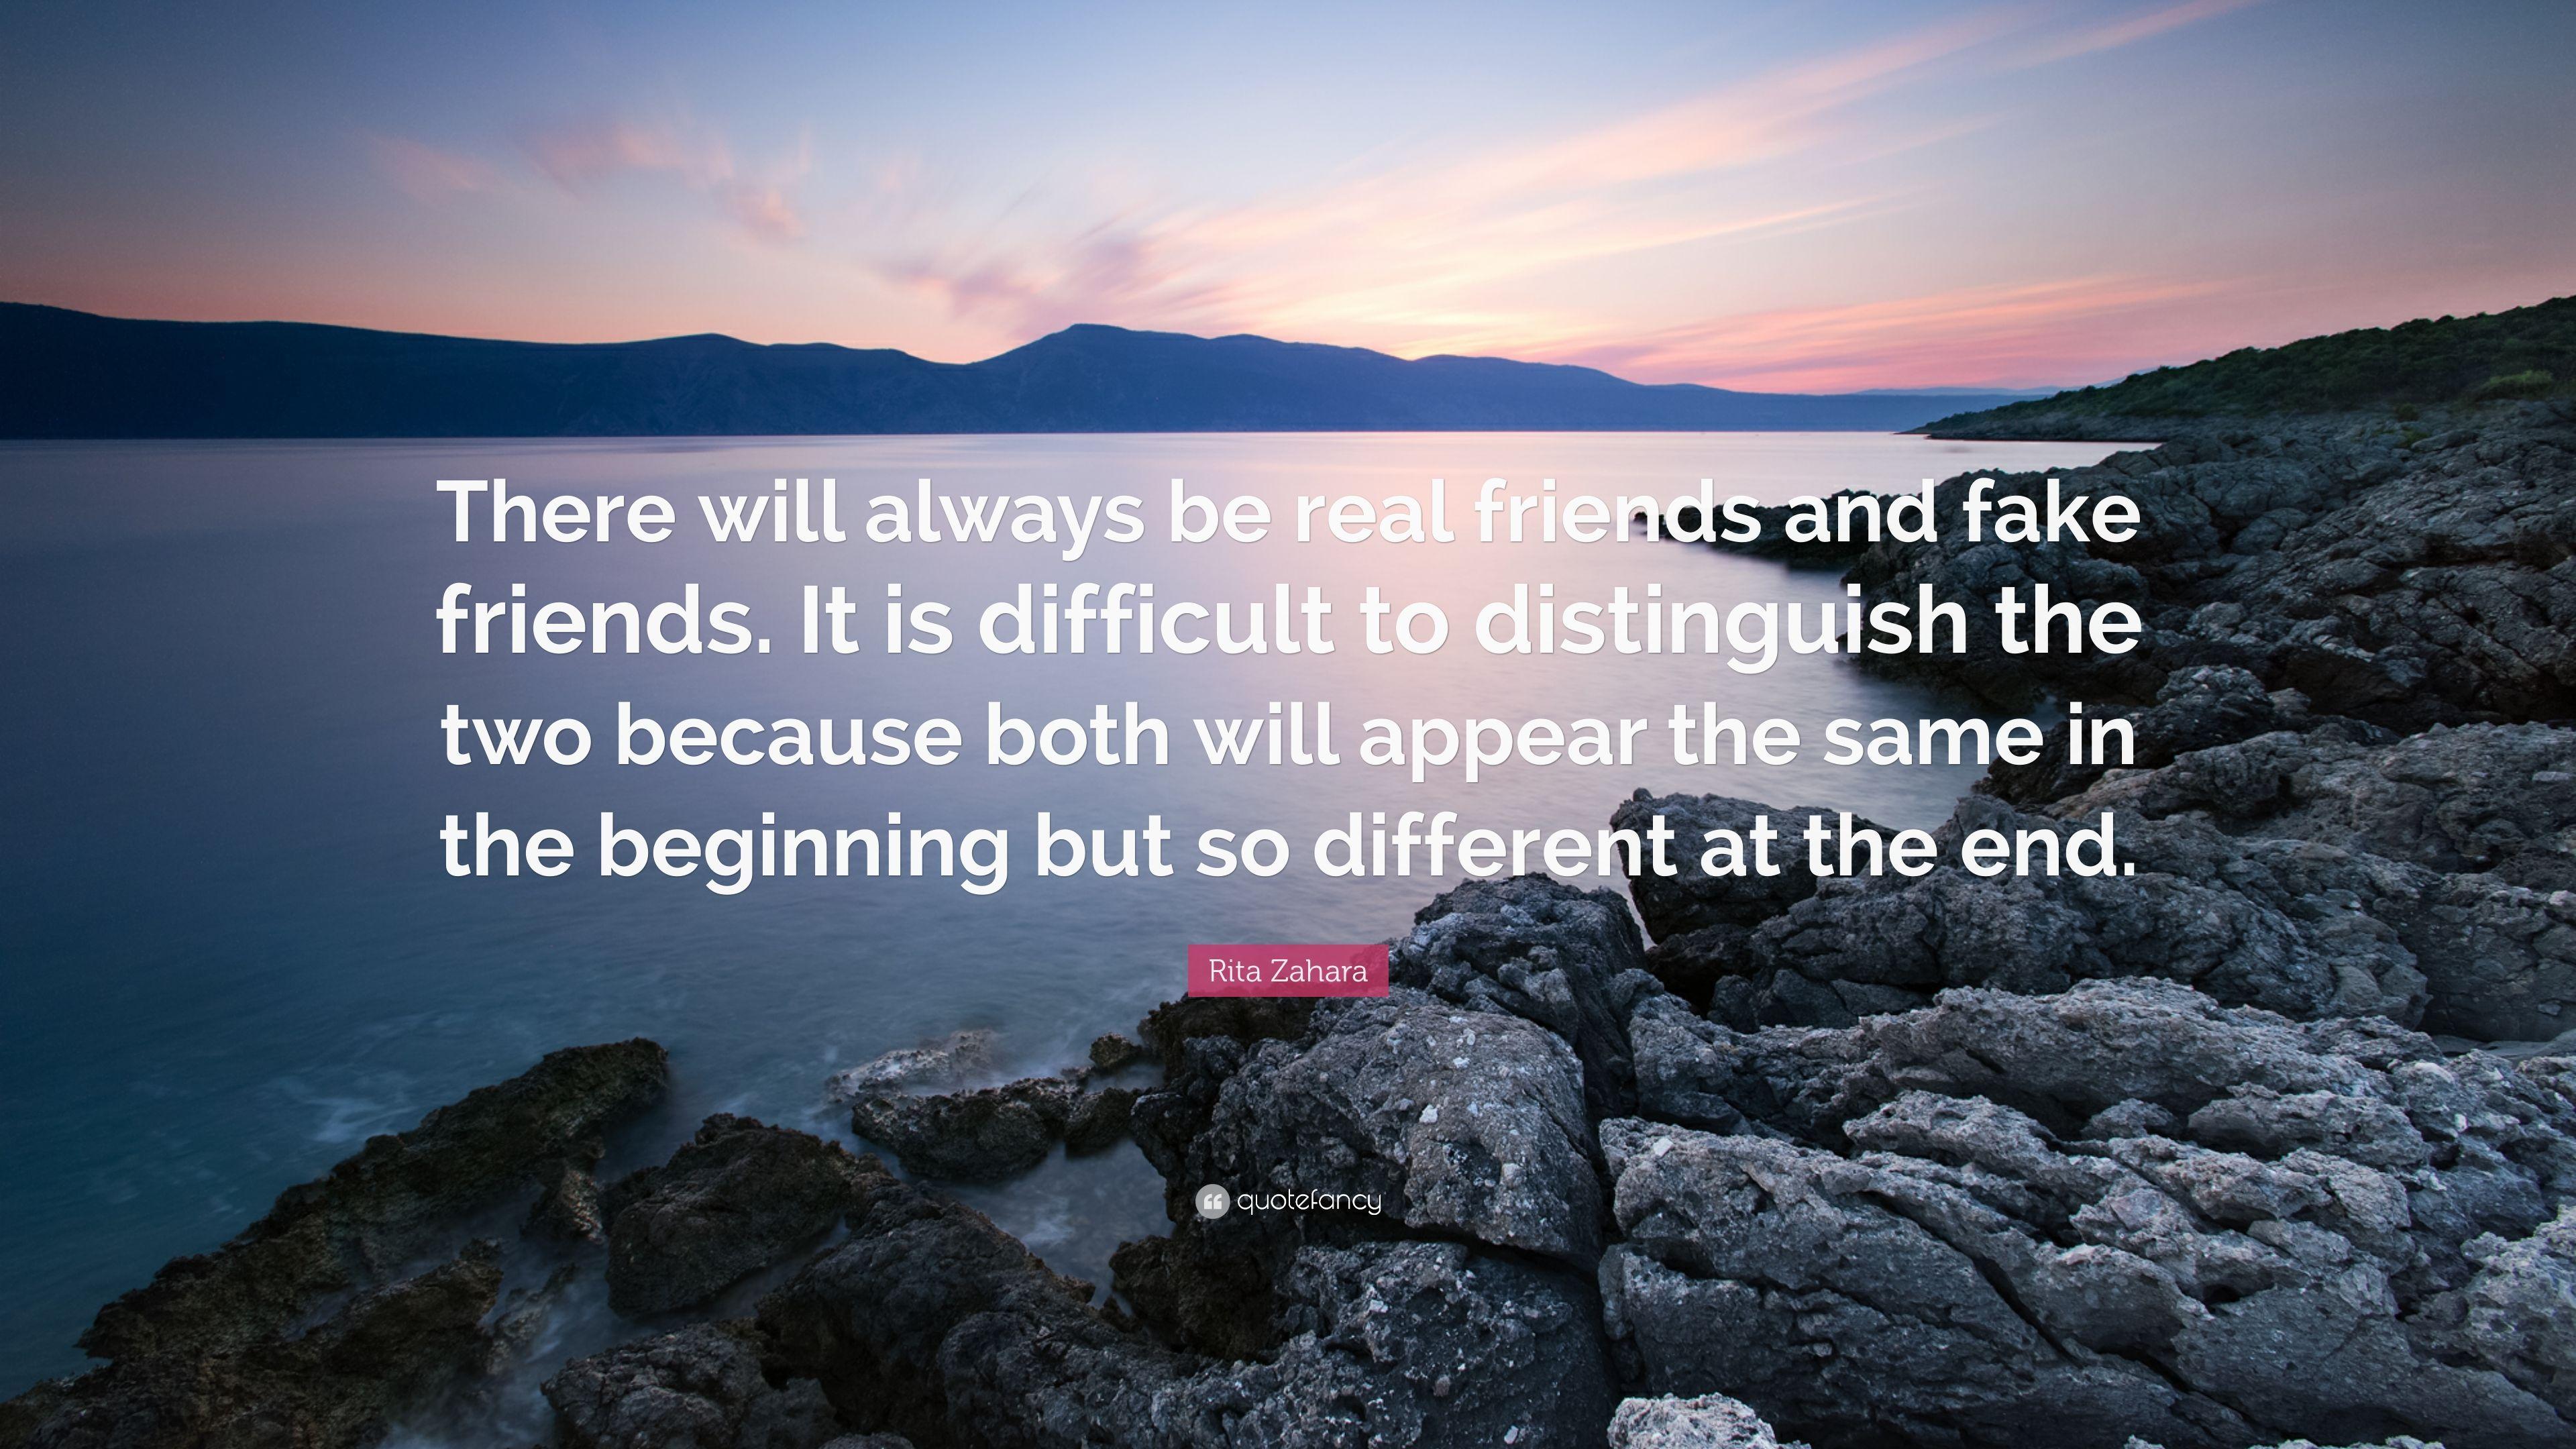 Rita Zahara Quote: “There will always be real friends and fake